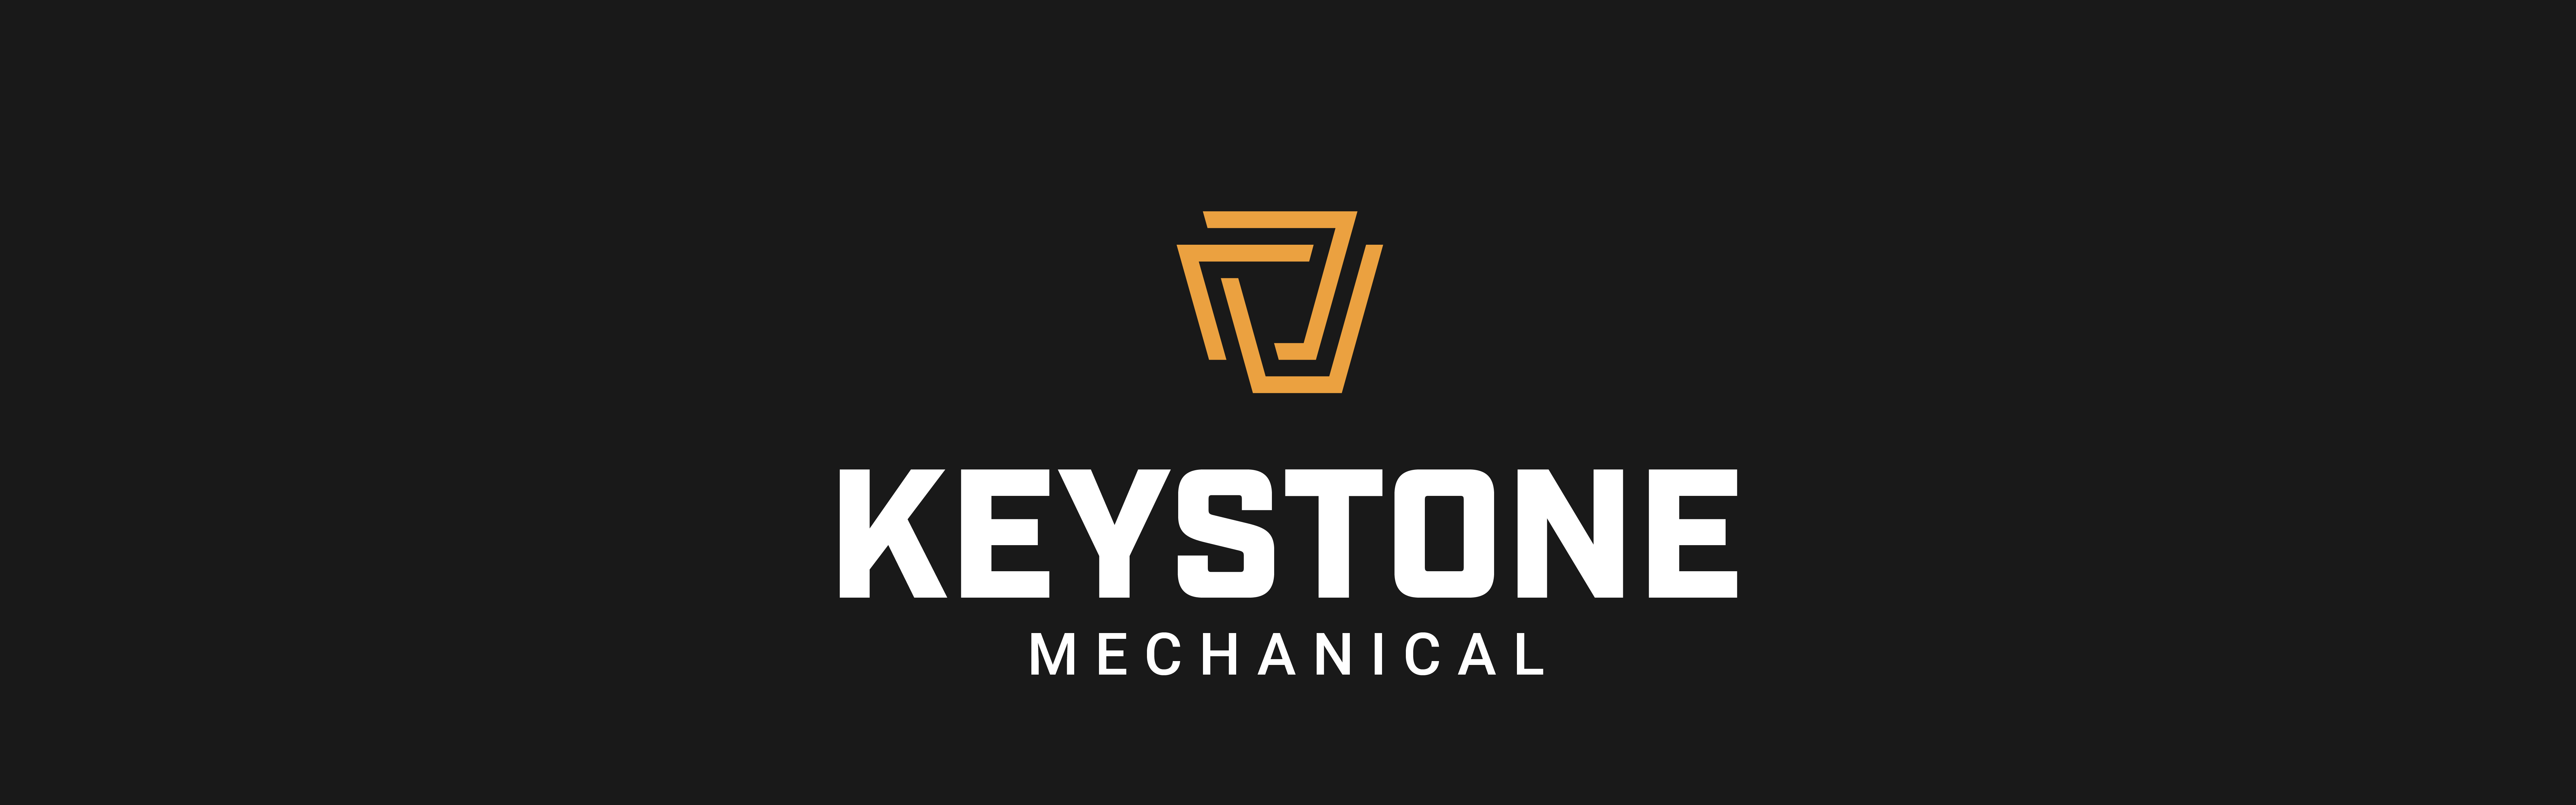 Logo of "Keystone Mechanical" featuring a stylized letter 'K' inside a shield-like icon above the company name, presented on a black background.